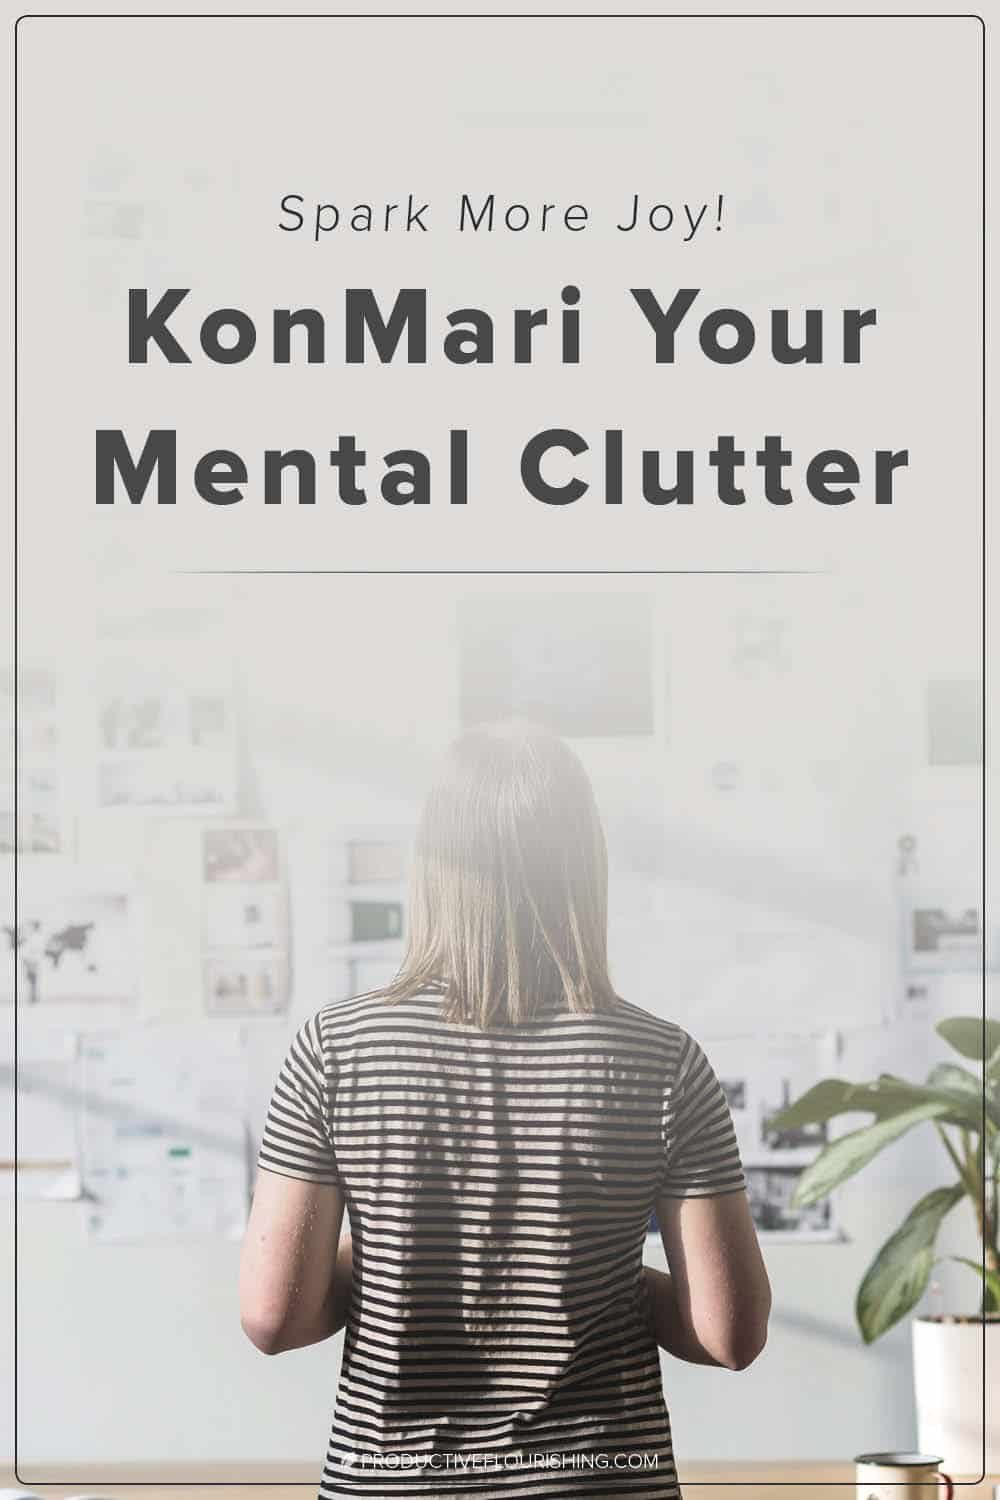 Click to find three principles to declutter your mental clutter. Mental clutter obscures our innate entrepreneurship wisdom, creativity, and resilience. The principles of mental decluttering are so simple that you may be tempted to discount them. It can help your business productivity, creativity and goal setting. #declutteringtips #konmariprinciples #productiveflourishing